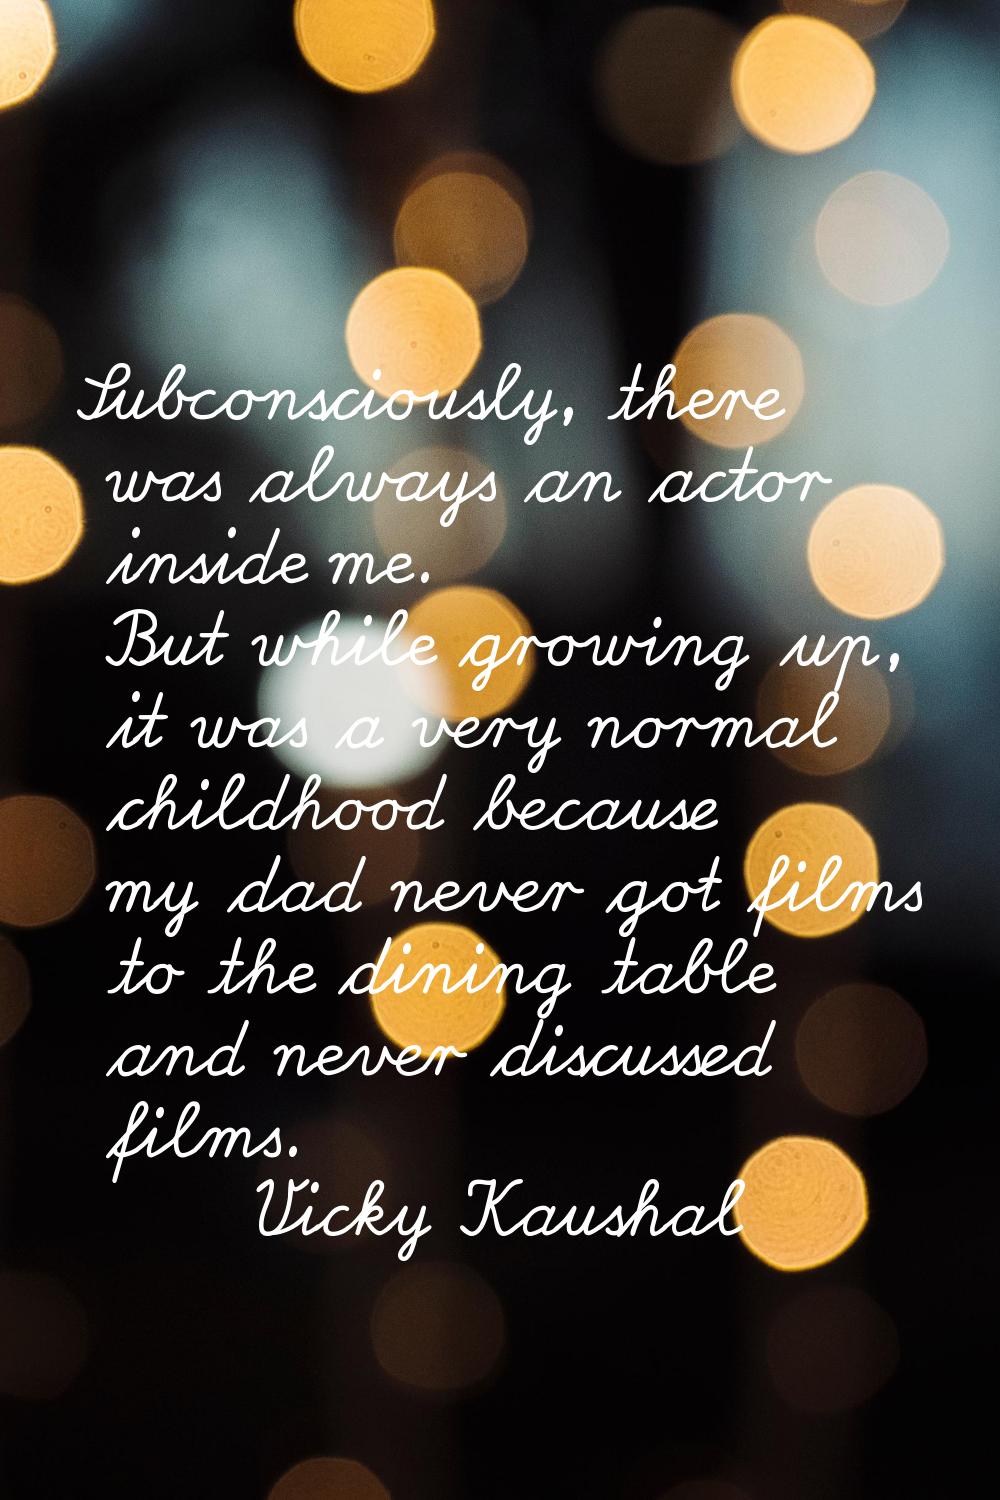 Subconsciously, there was always an actor inside me. But while growing up, it was a very normal chi